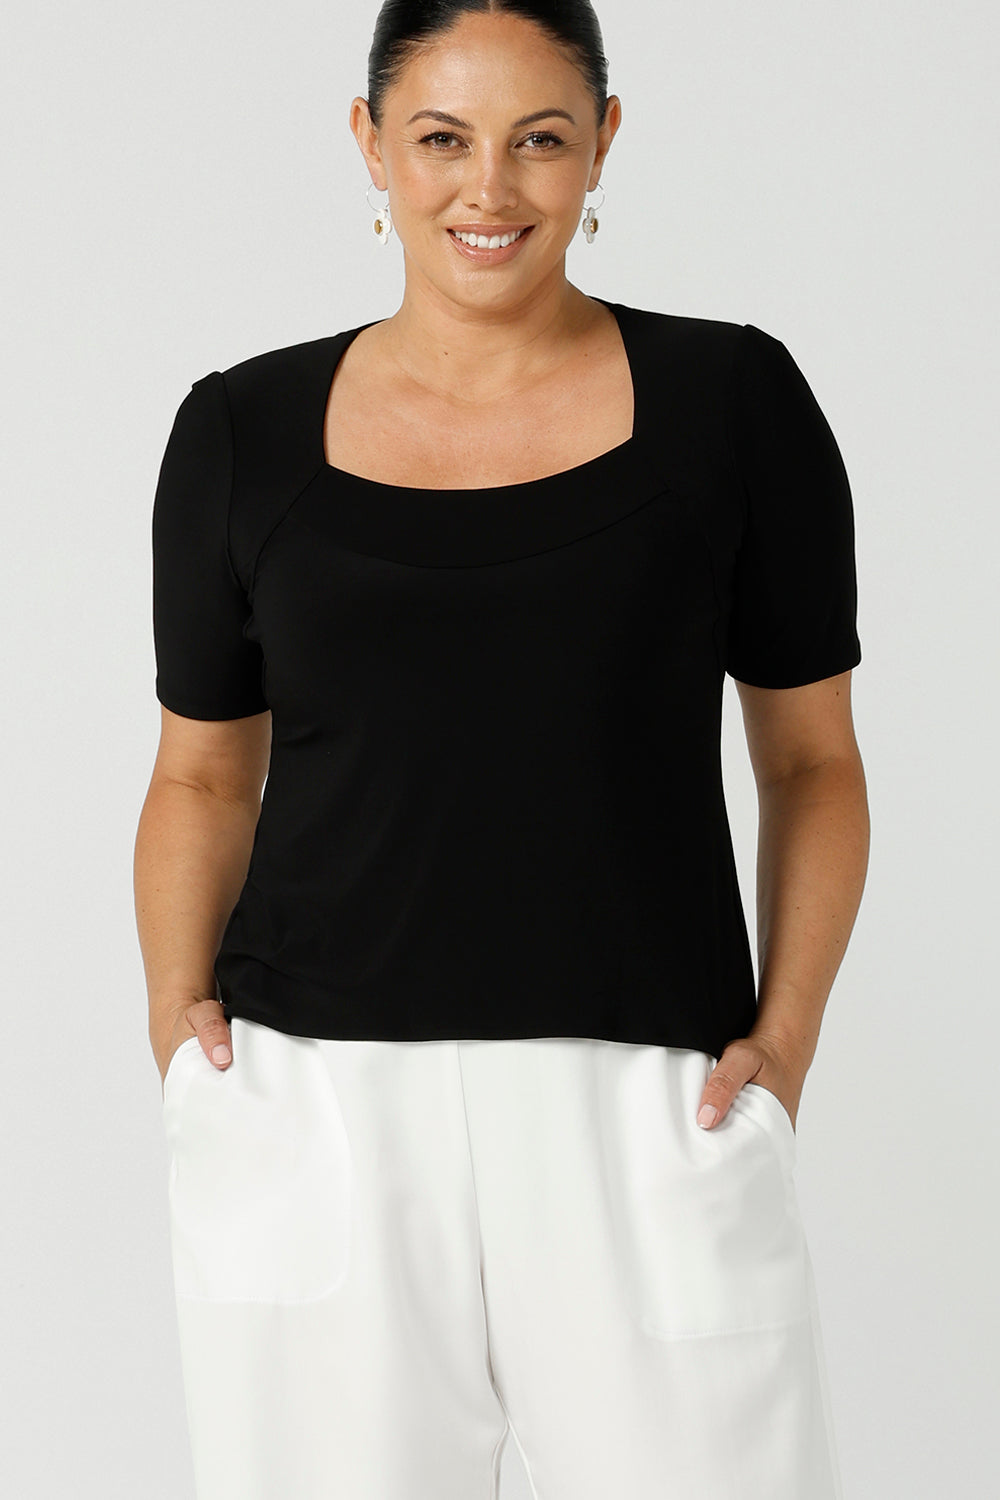 Close up of a curvy woman wears short sleeve black top with square neckline. A slim fit top in classic black, this tailored jersey top wears well with workwear separates for an office look and also as a smart casual top. Shop tops in petite, mid size and plus size online at Australian women's clothing brand, Leina & Fleur.